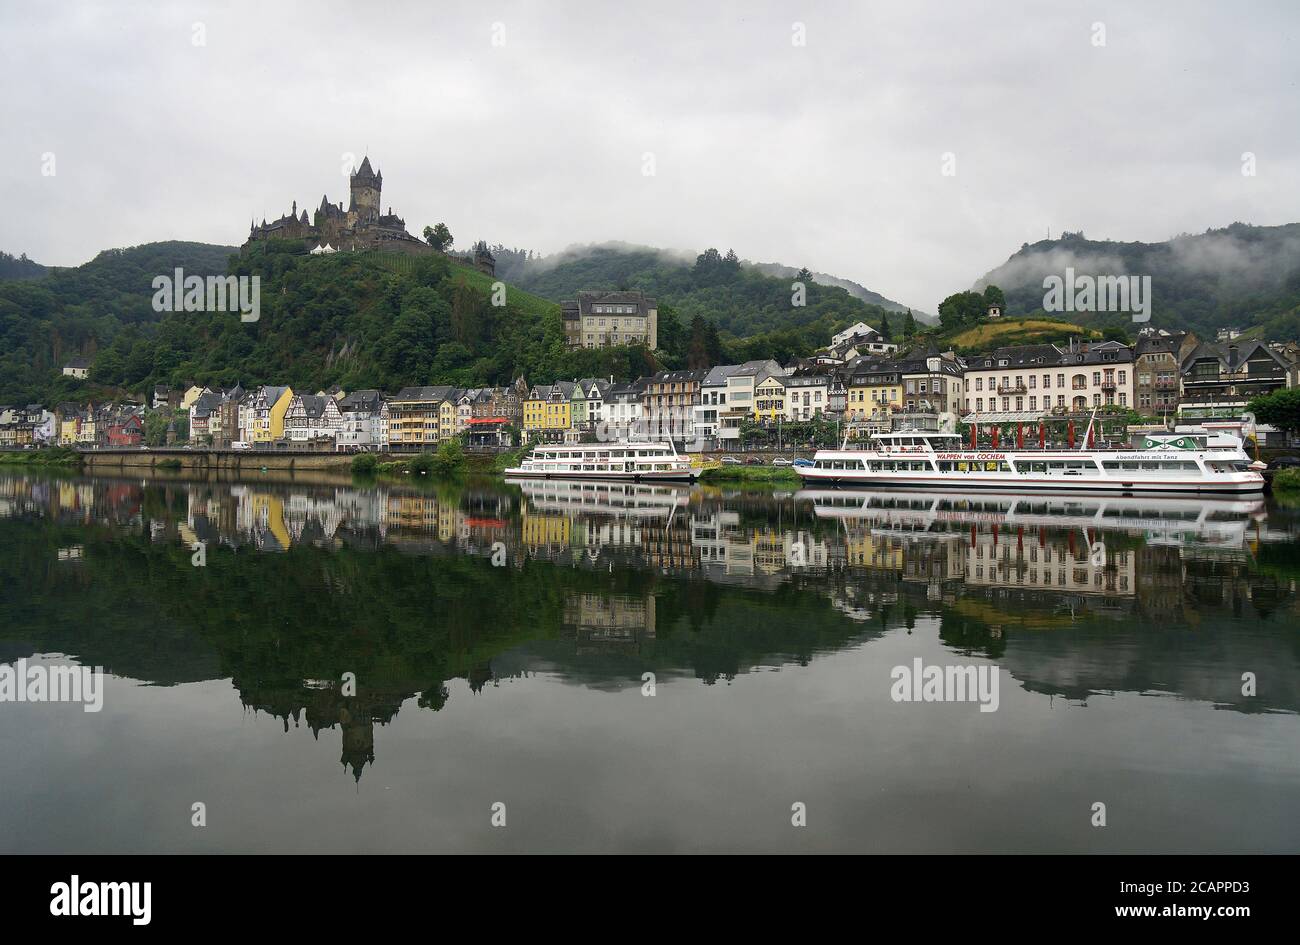 The village of Cochem in cloudy weather seen from the Skagerakbrücke, Germany Stock Photo